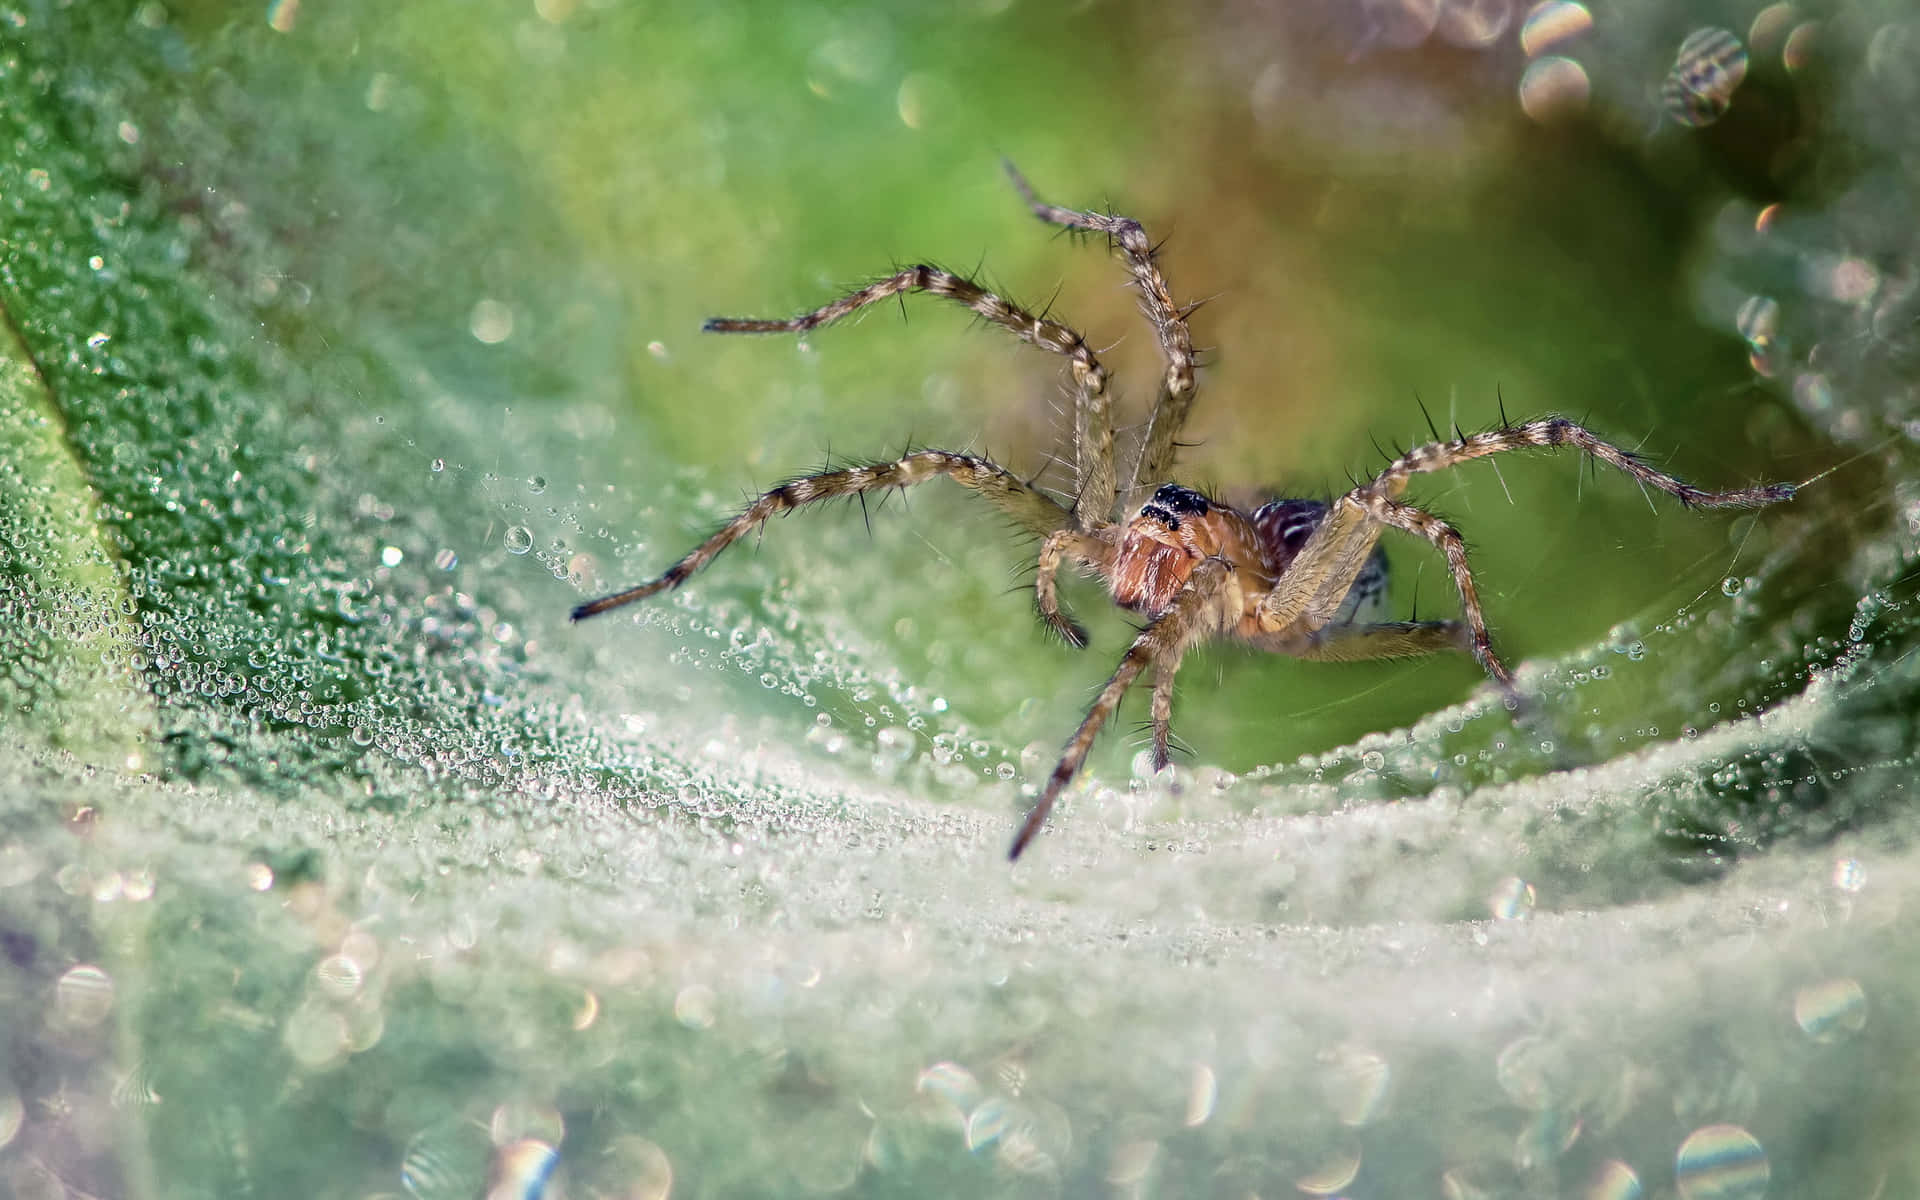 A Spider Sitting On A Web With Water Droplets